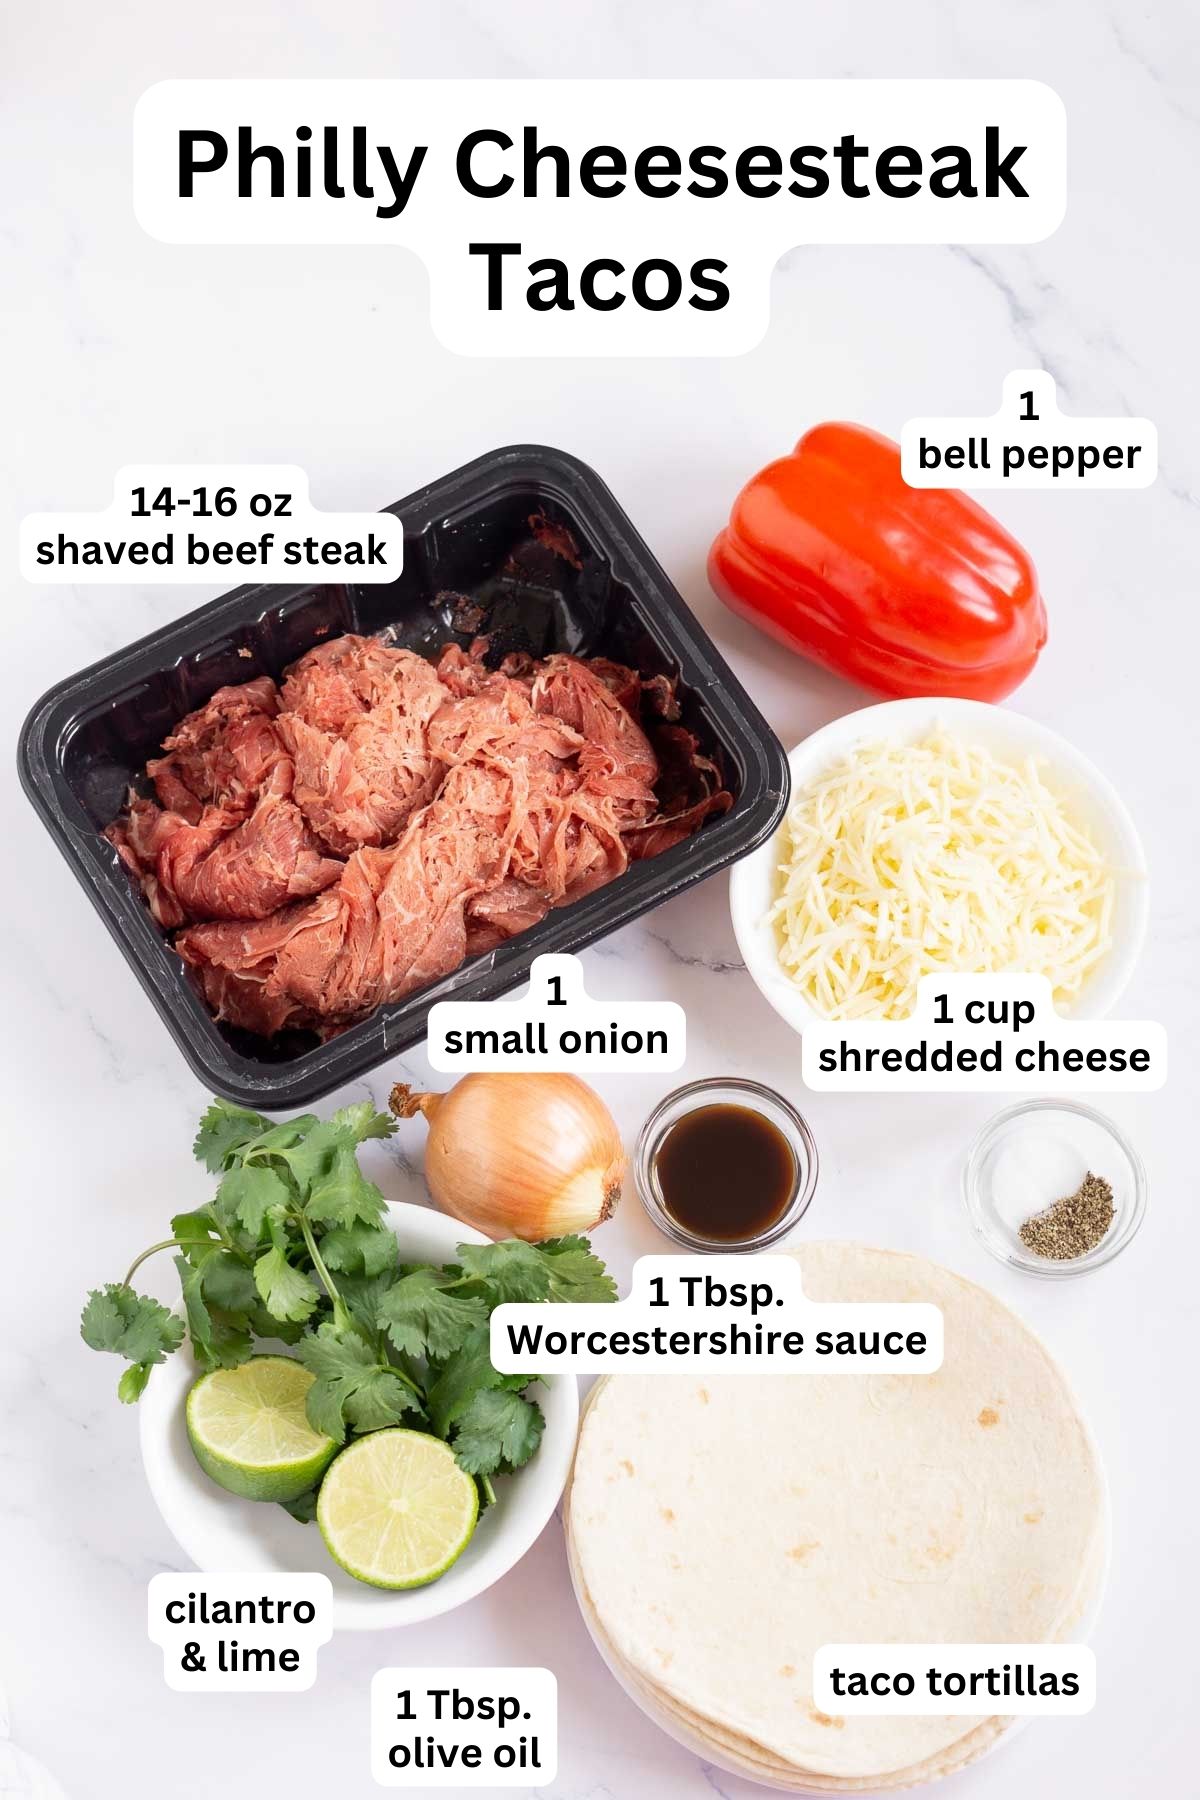 Ingredients to make Philly Cheesesteak Tacos